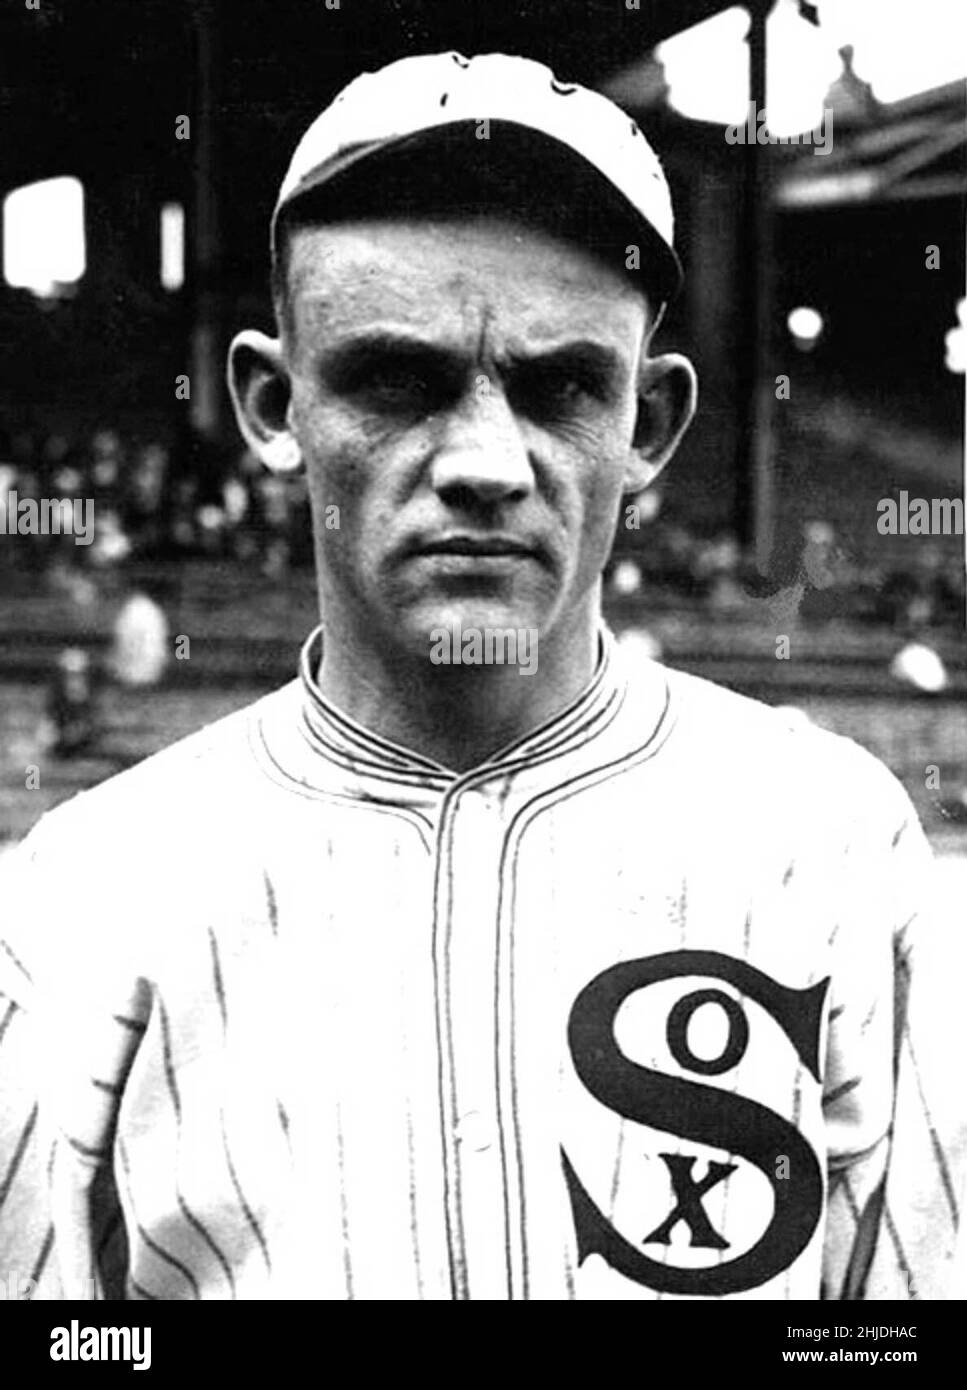 the chicago black sox